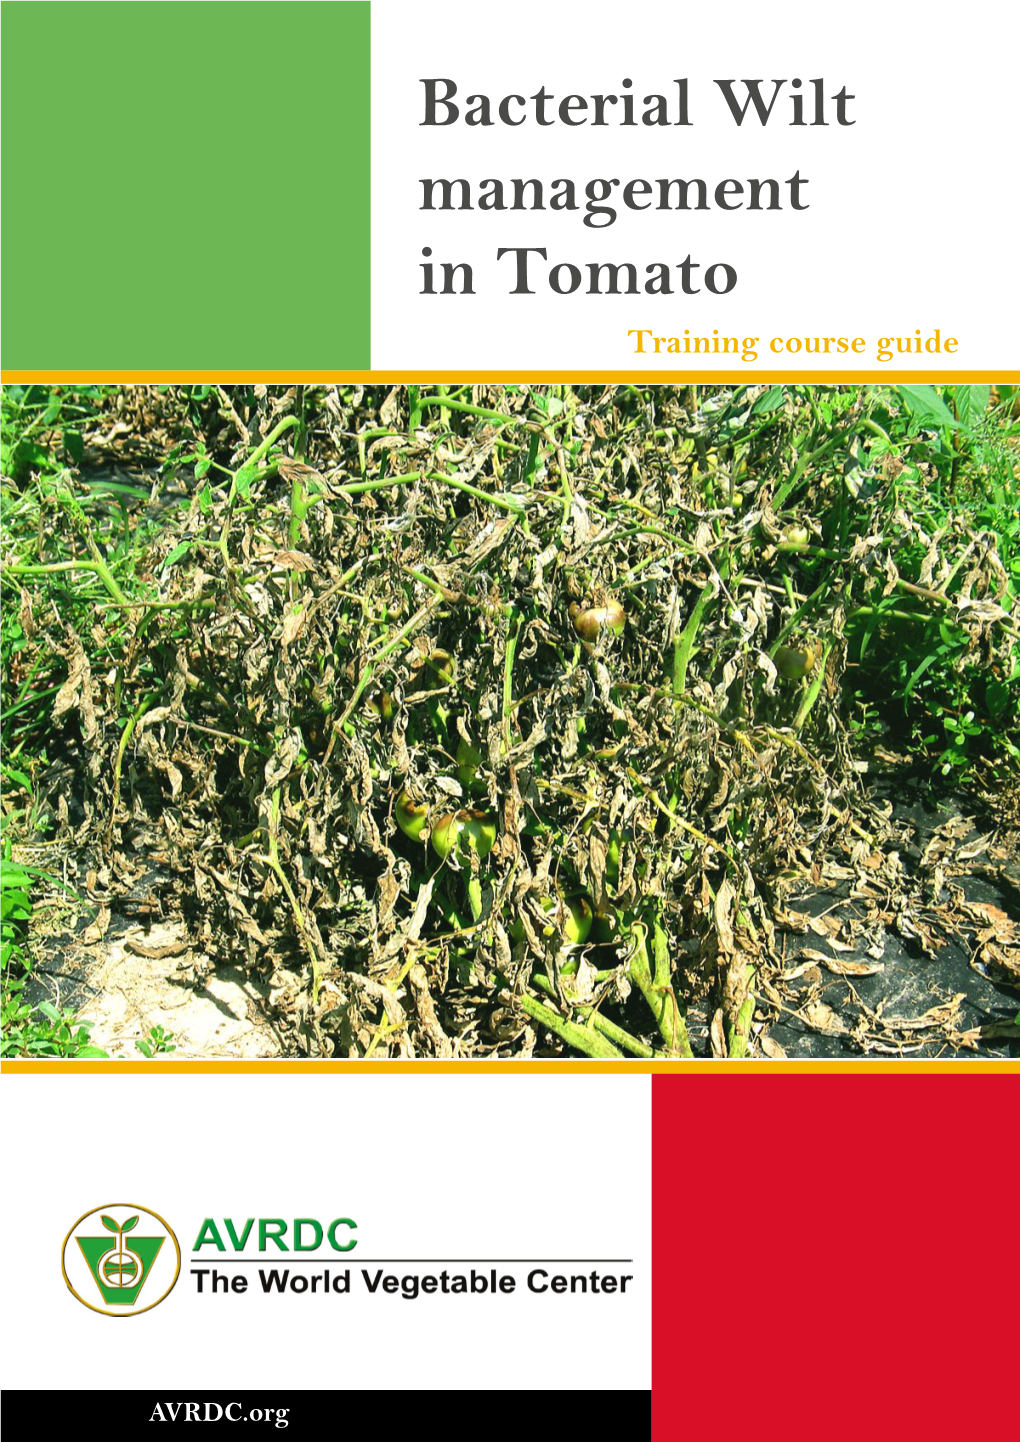 Bacterial Wilt Management in Tomato Training Course Guide